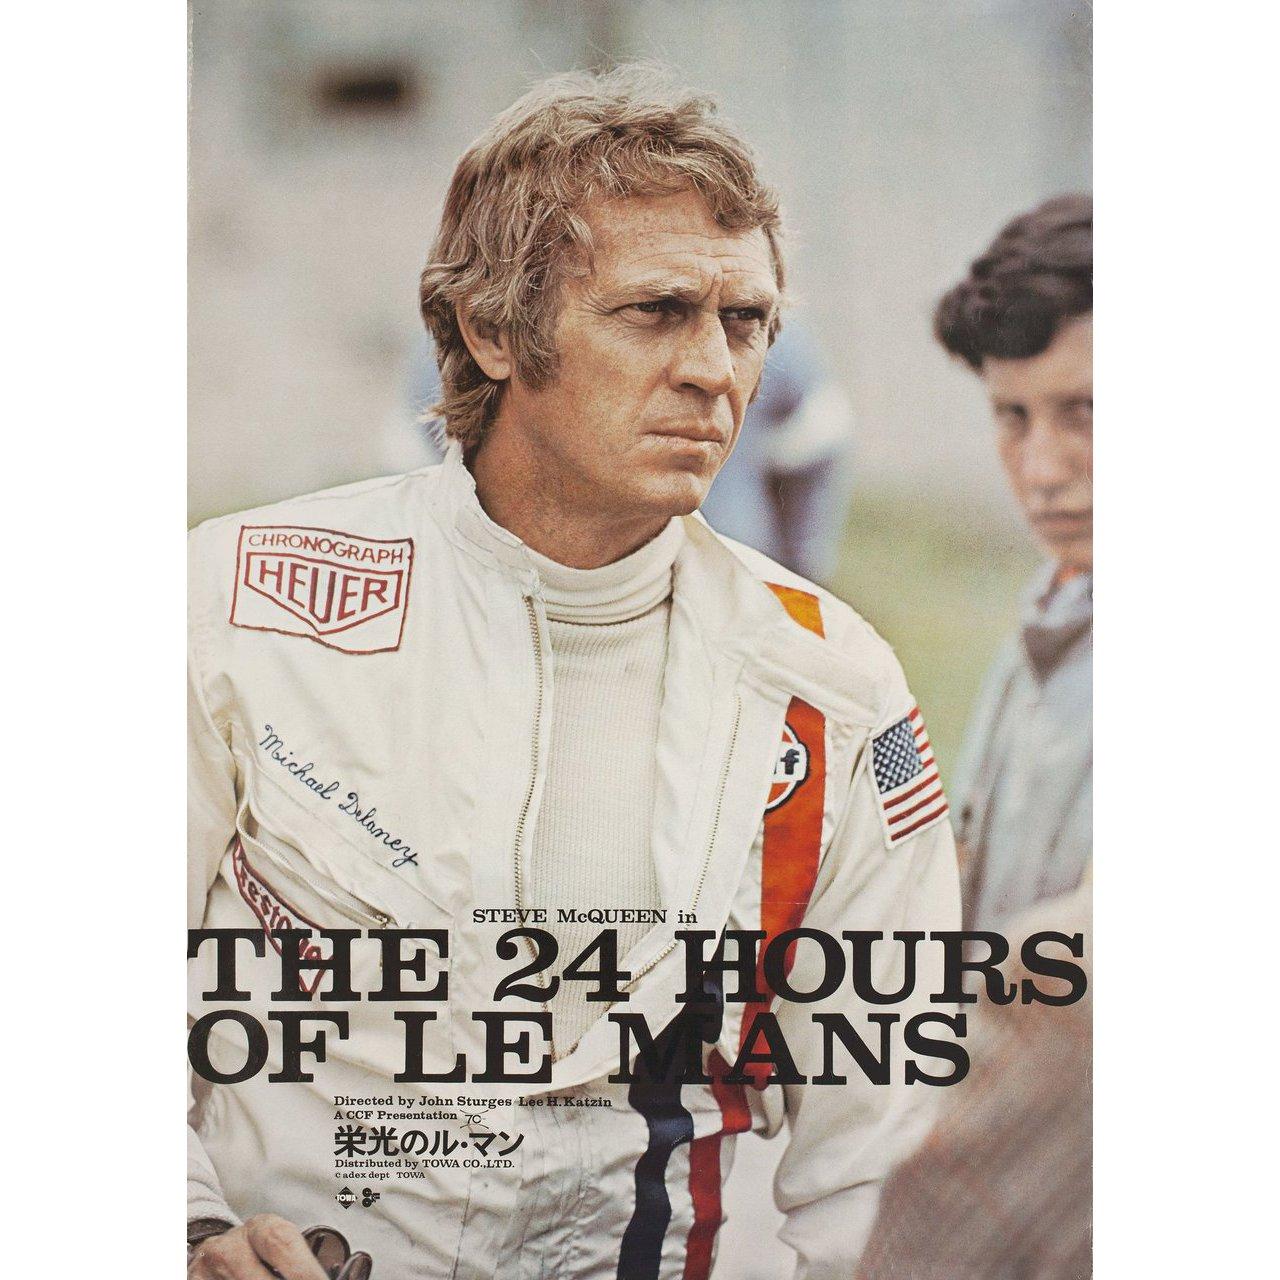 Original 1971 Japanese B2 poster for the film Le Mans directed by Lee H. Katzin with Steve McQueen / Siegfried Rauch / Elga Andersen / Ronald Leigh-Hunt. Very Good-Fine condition, rolled with pinholes. Please note: the size is stated in inches and